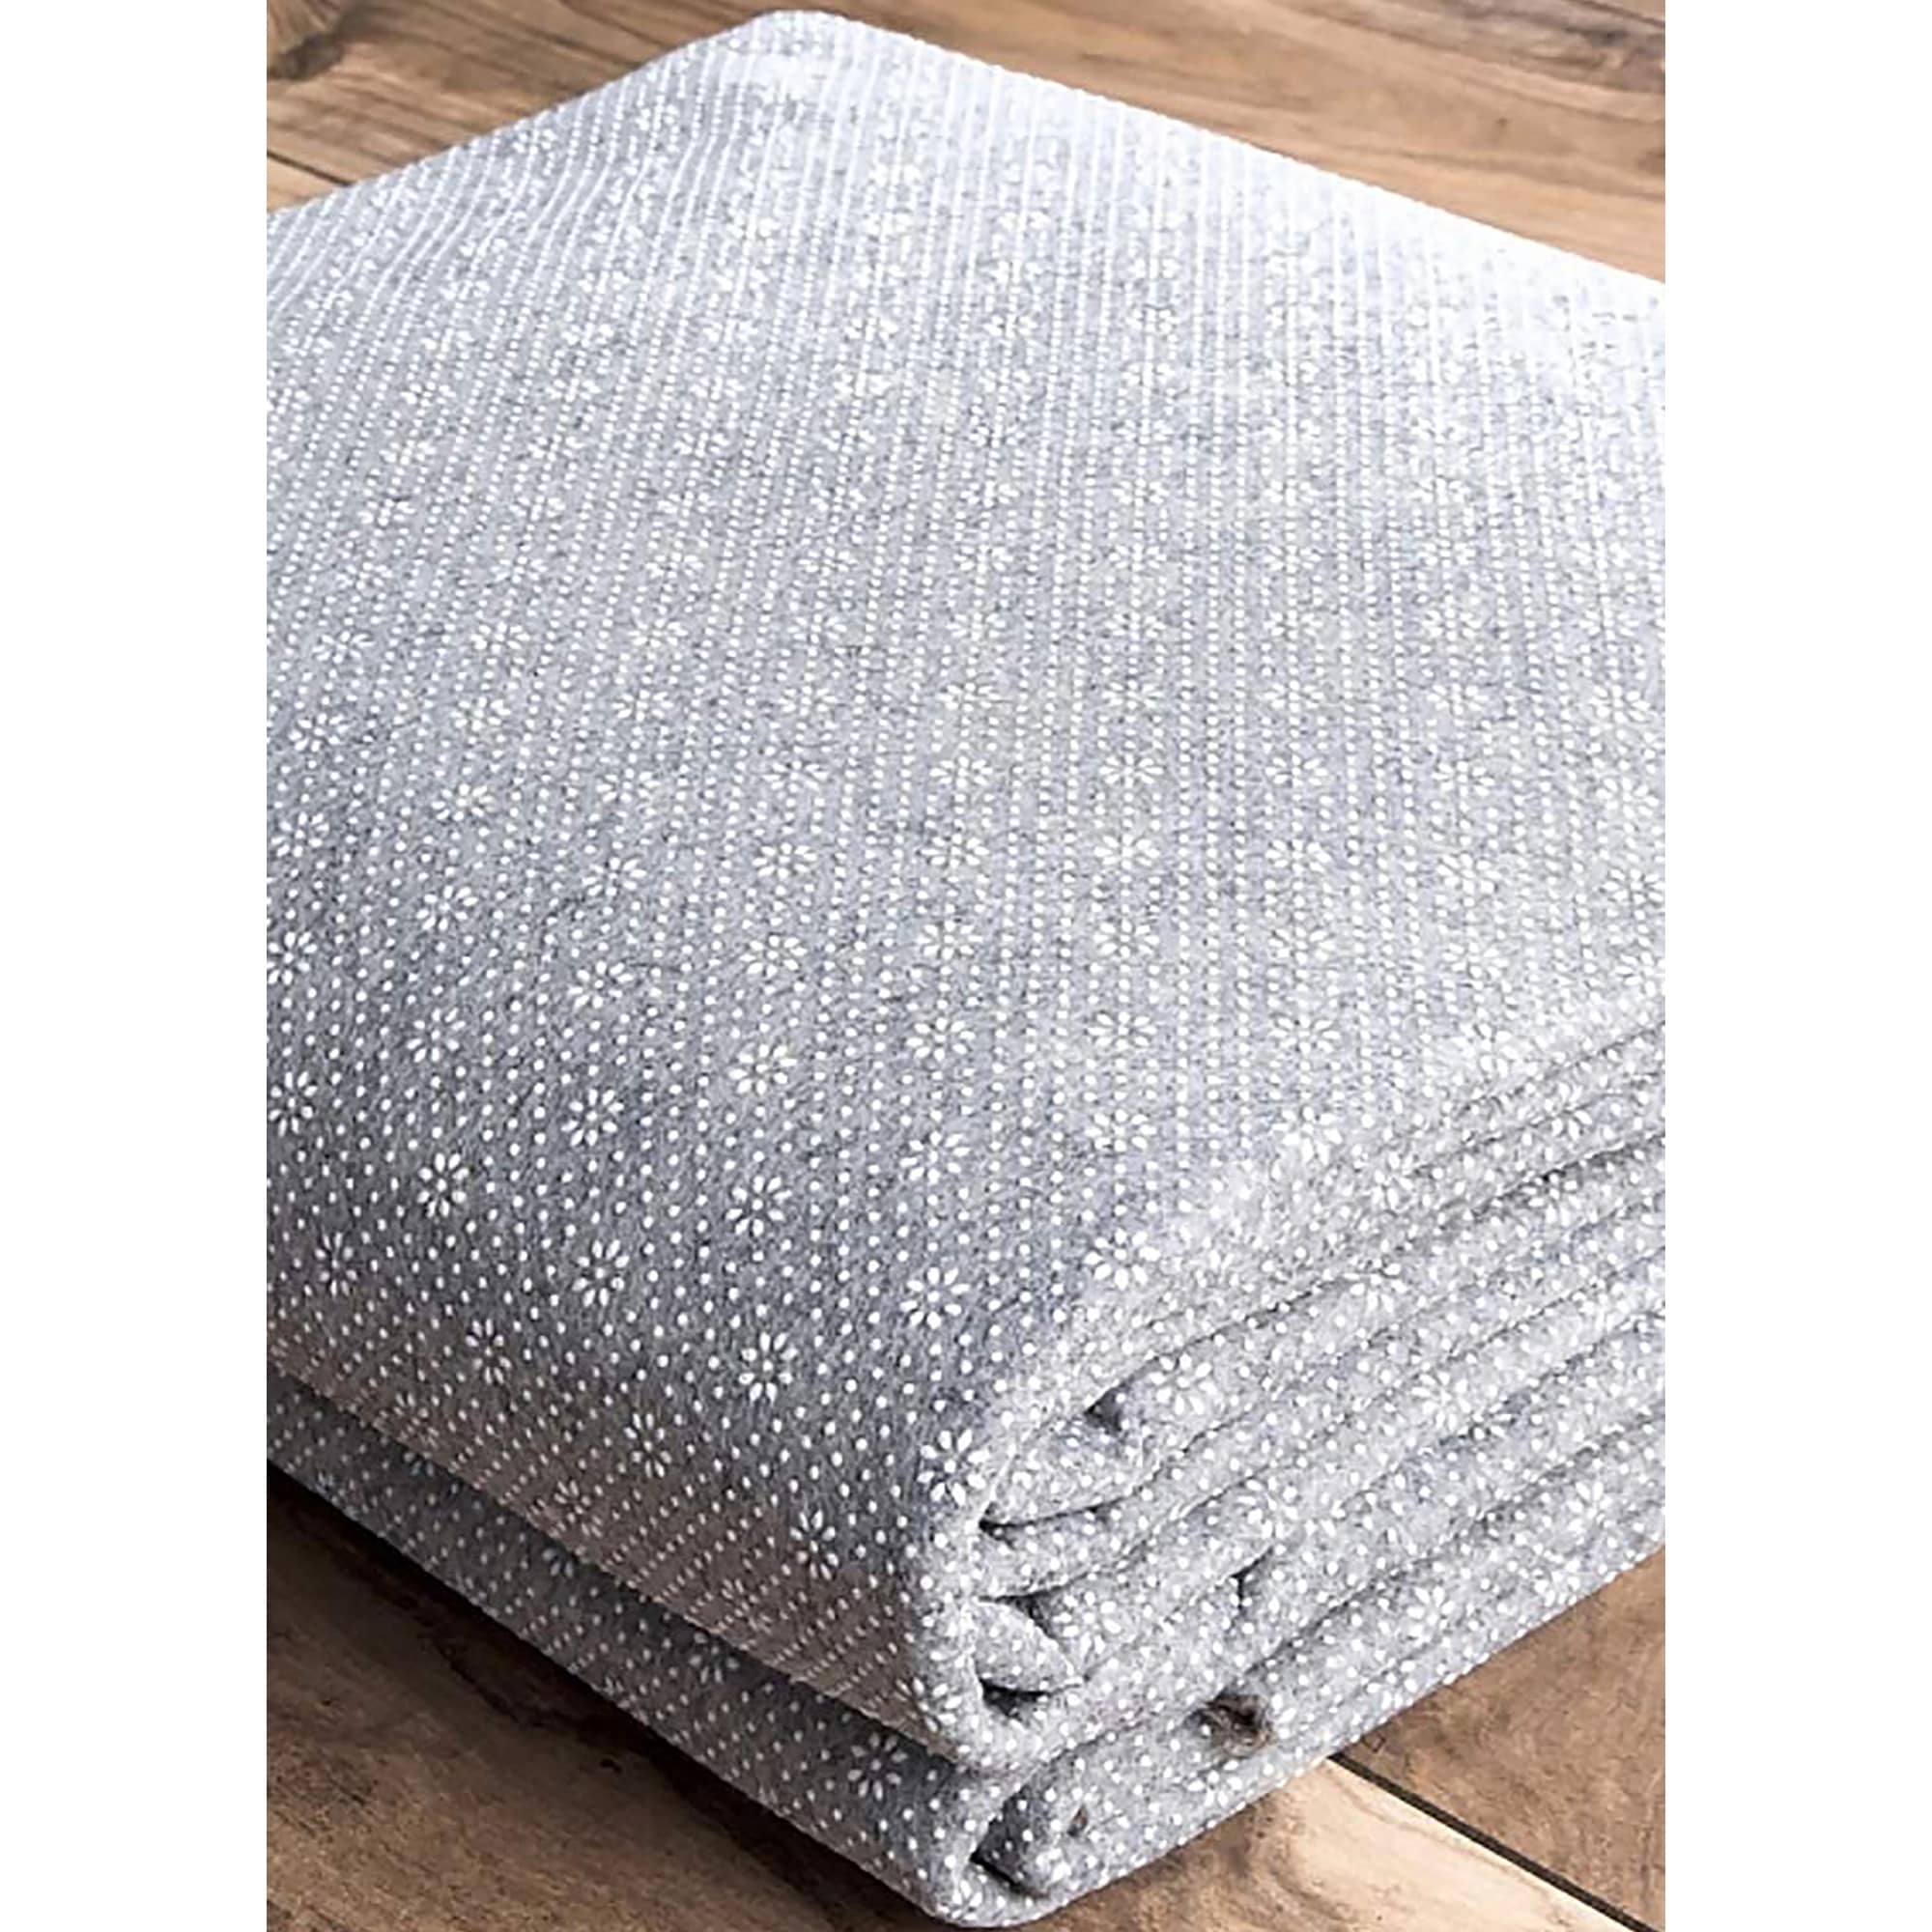 https://ak1.ostkcdn.com/images/products/is/images/direct/e9c44d98fe0c2c77ece788c3b0d78baa2508a7ab/8%27x10%27-Non-Slip-Grey-Thick-Reduce-Noise-Carpet-Mat-for-Hardwood-Floor.jpg